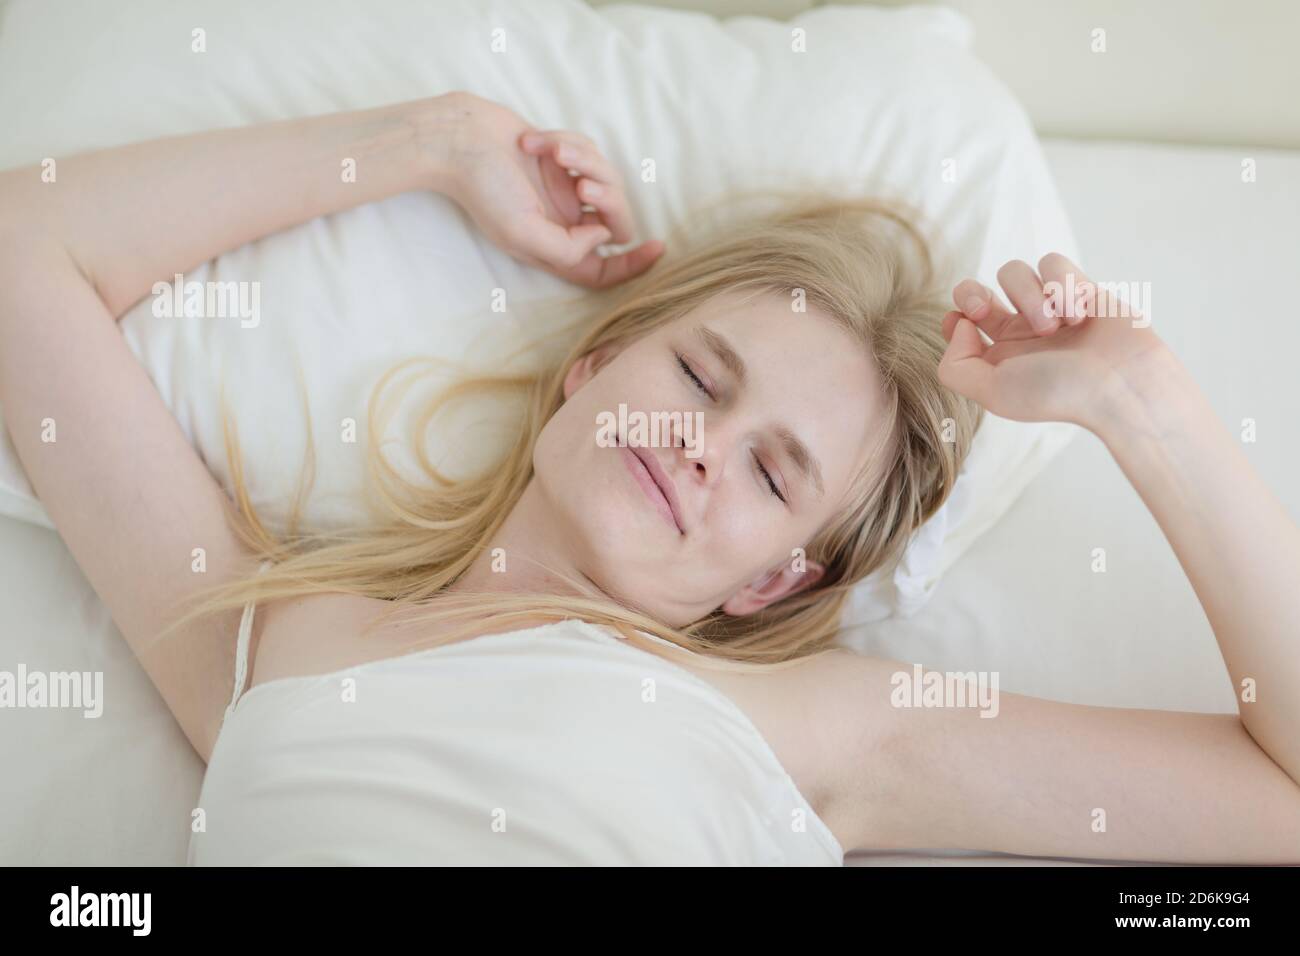 Beautiful young woman in bed waking up while stretching her arms in the morning relaxed from a good night's sleep. Stock Photo